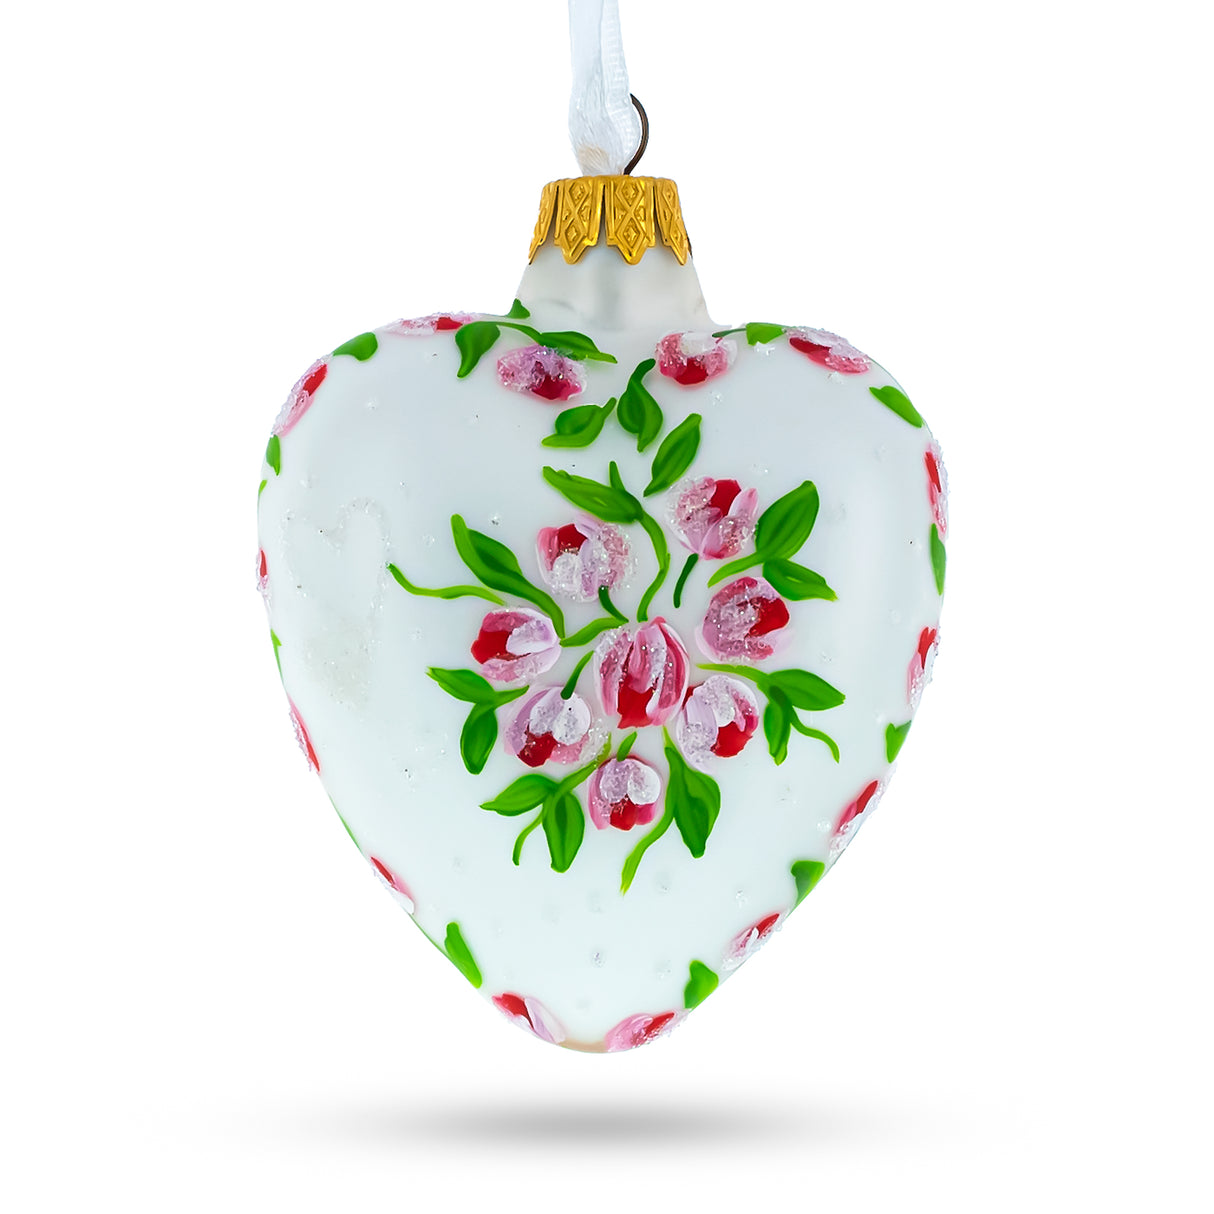 Mother's Day Red Heart Shape Glass Ornament in White color, Heart shape